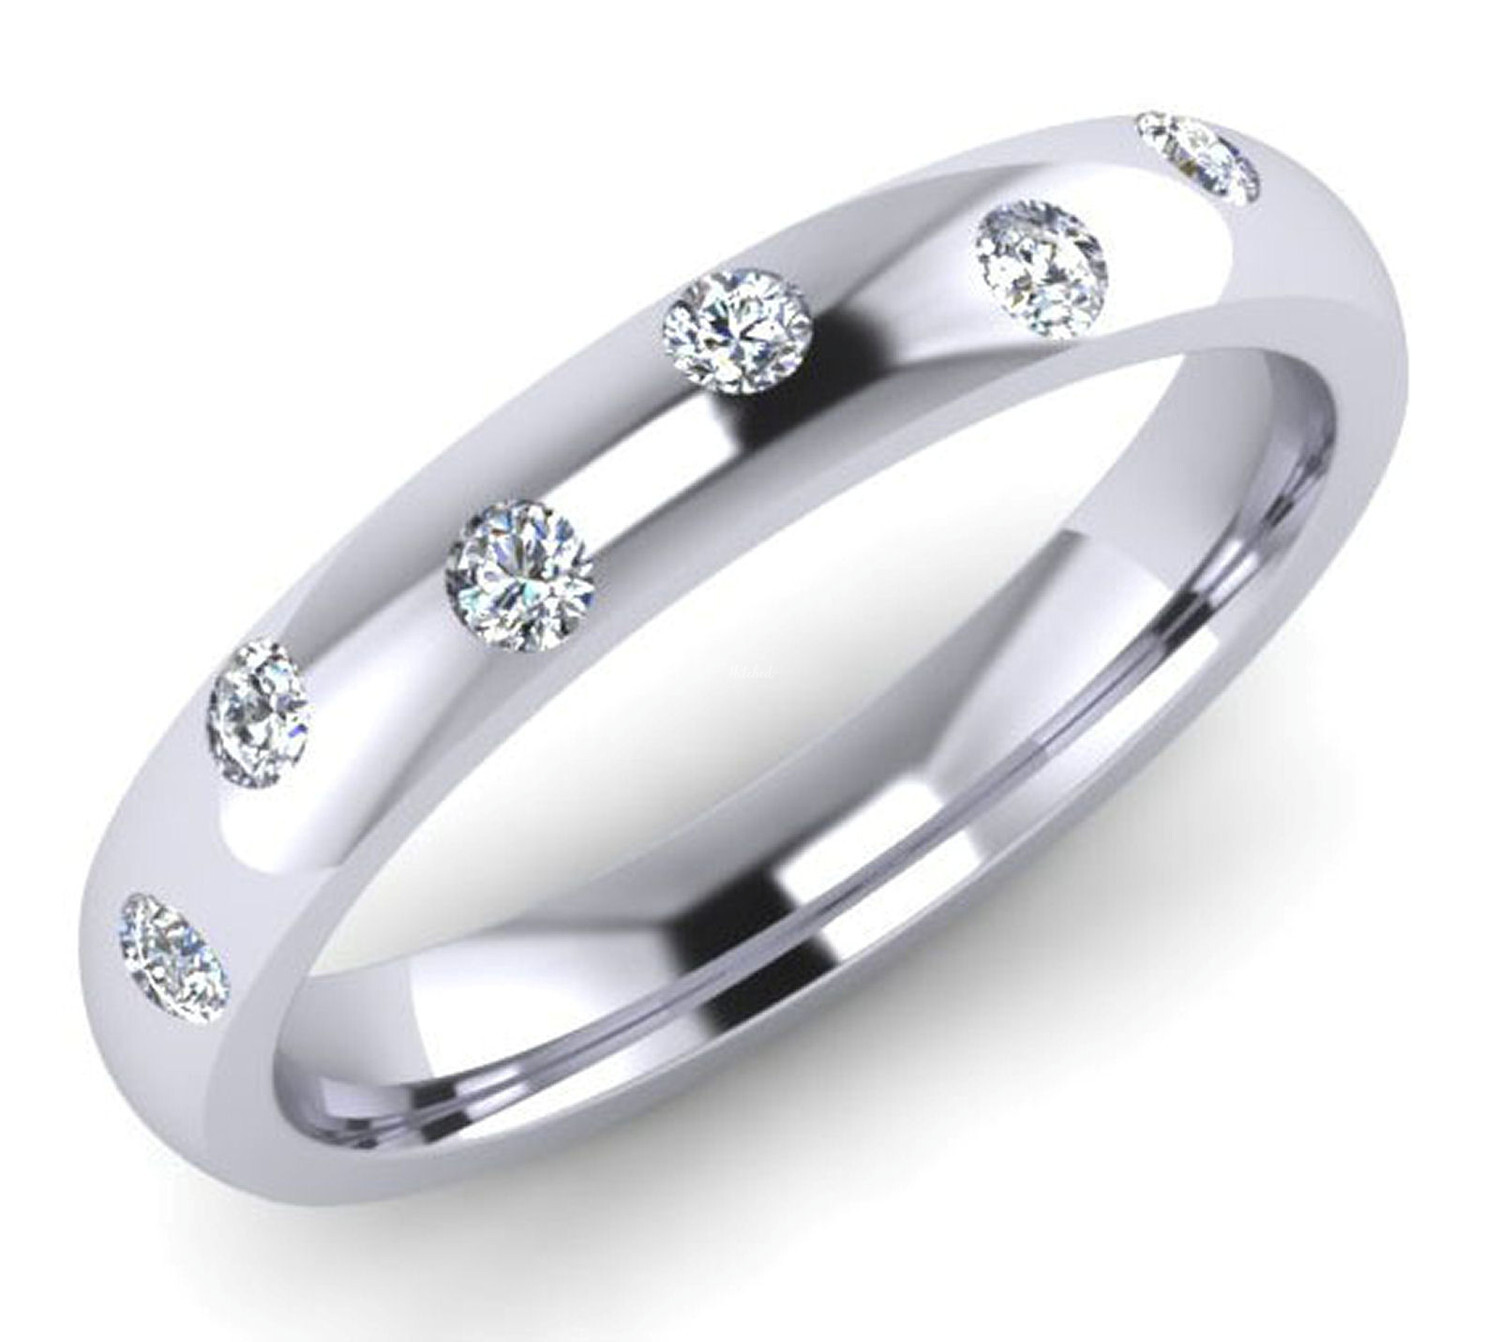 G48 Wedding Ring from Goldfinger Rings - hitched.co.uk